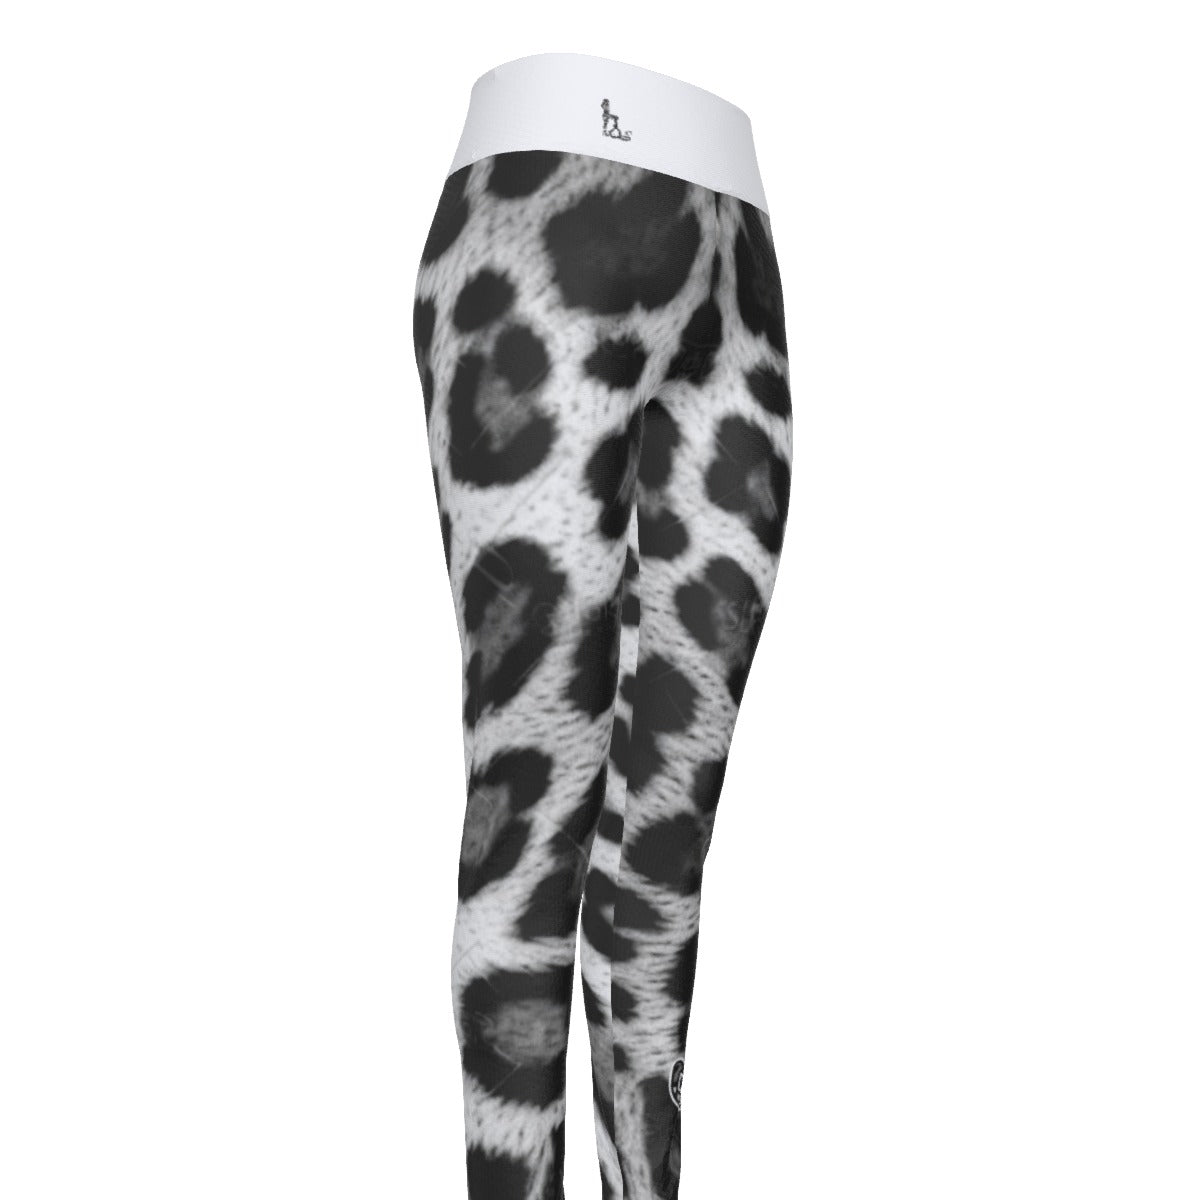 Officially Sexy Snow Leopard Print Collection Women's White High Waist Leggings #2 (English) 2